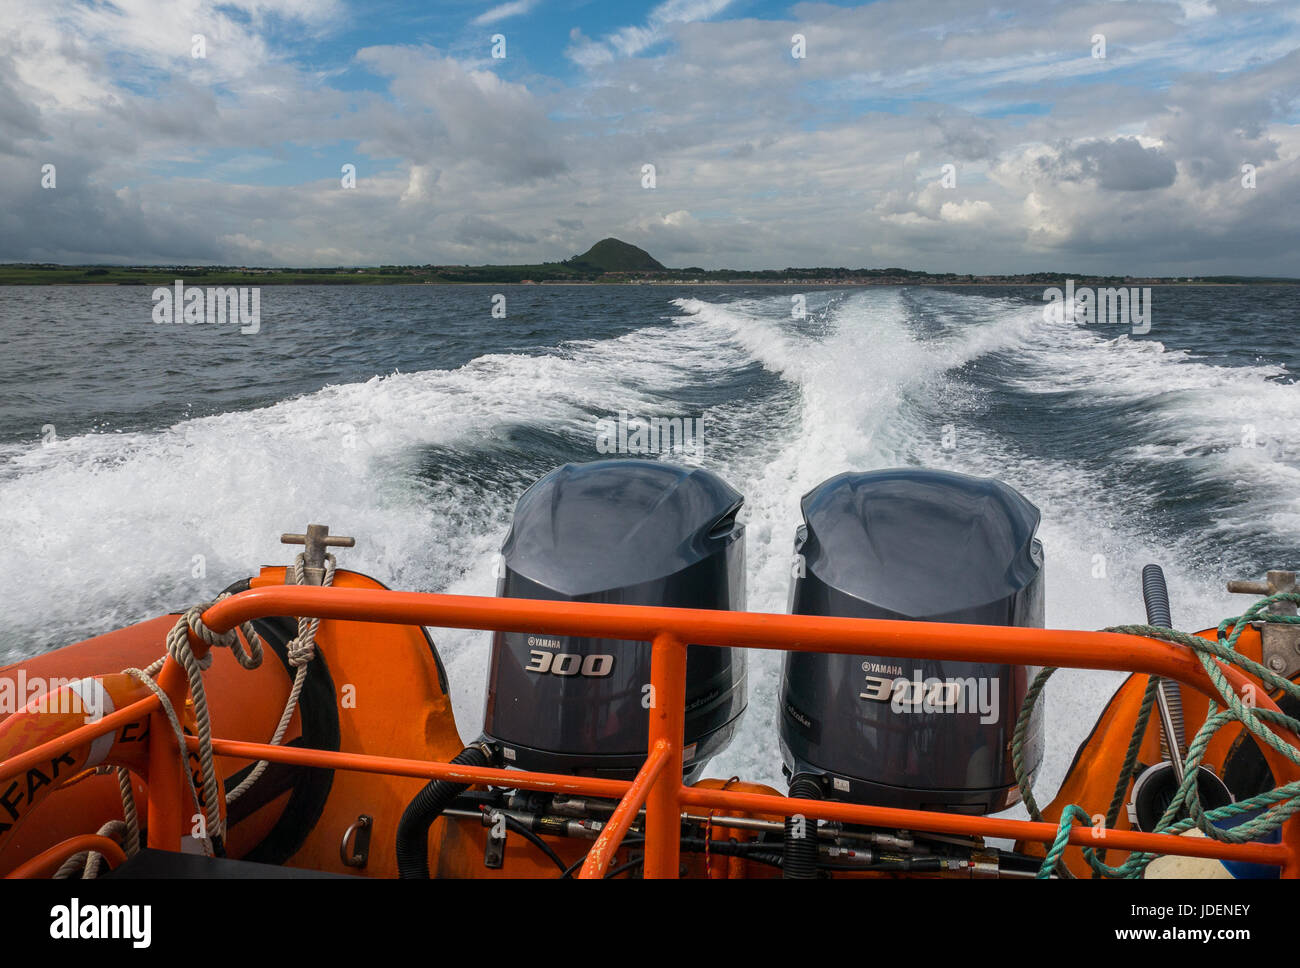 Twin boat engines on Seafari rigid inflatable boat, North Berwick, Firth of Forth, Scotland, showing boat speed and boat wake Stock Photo